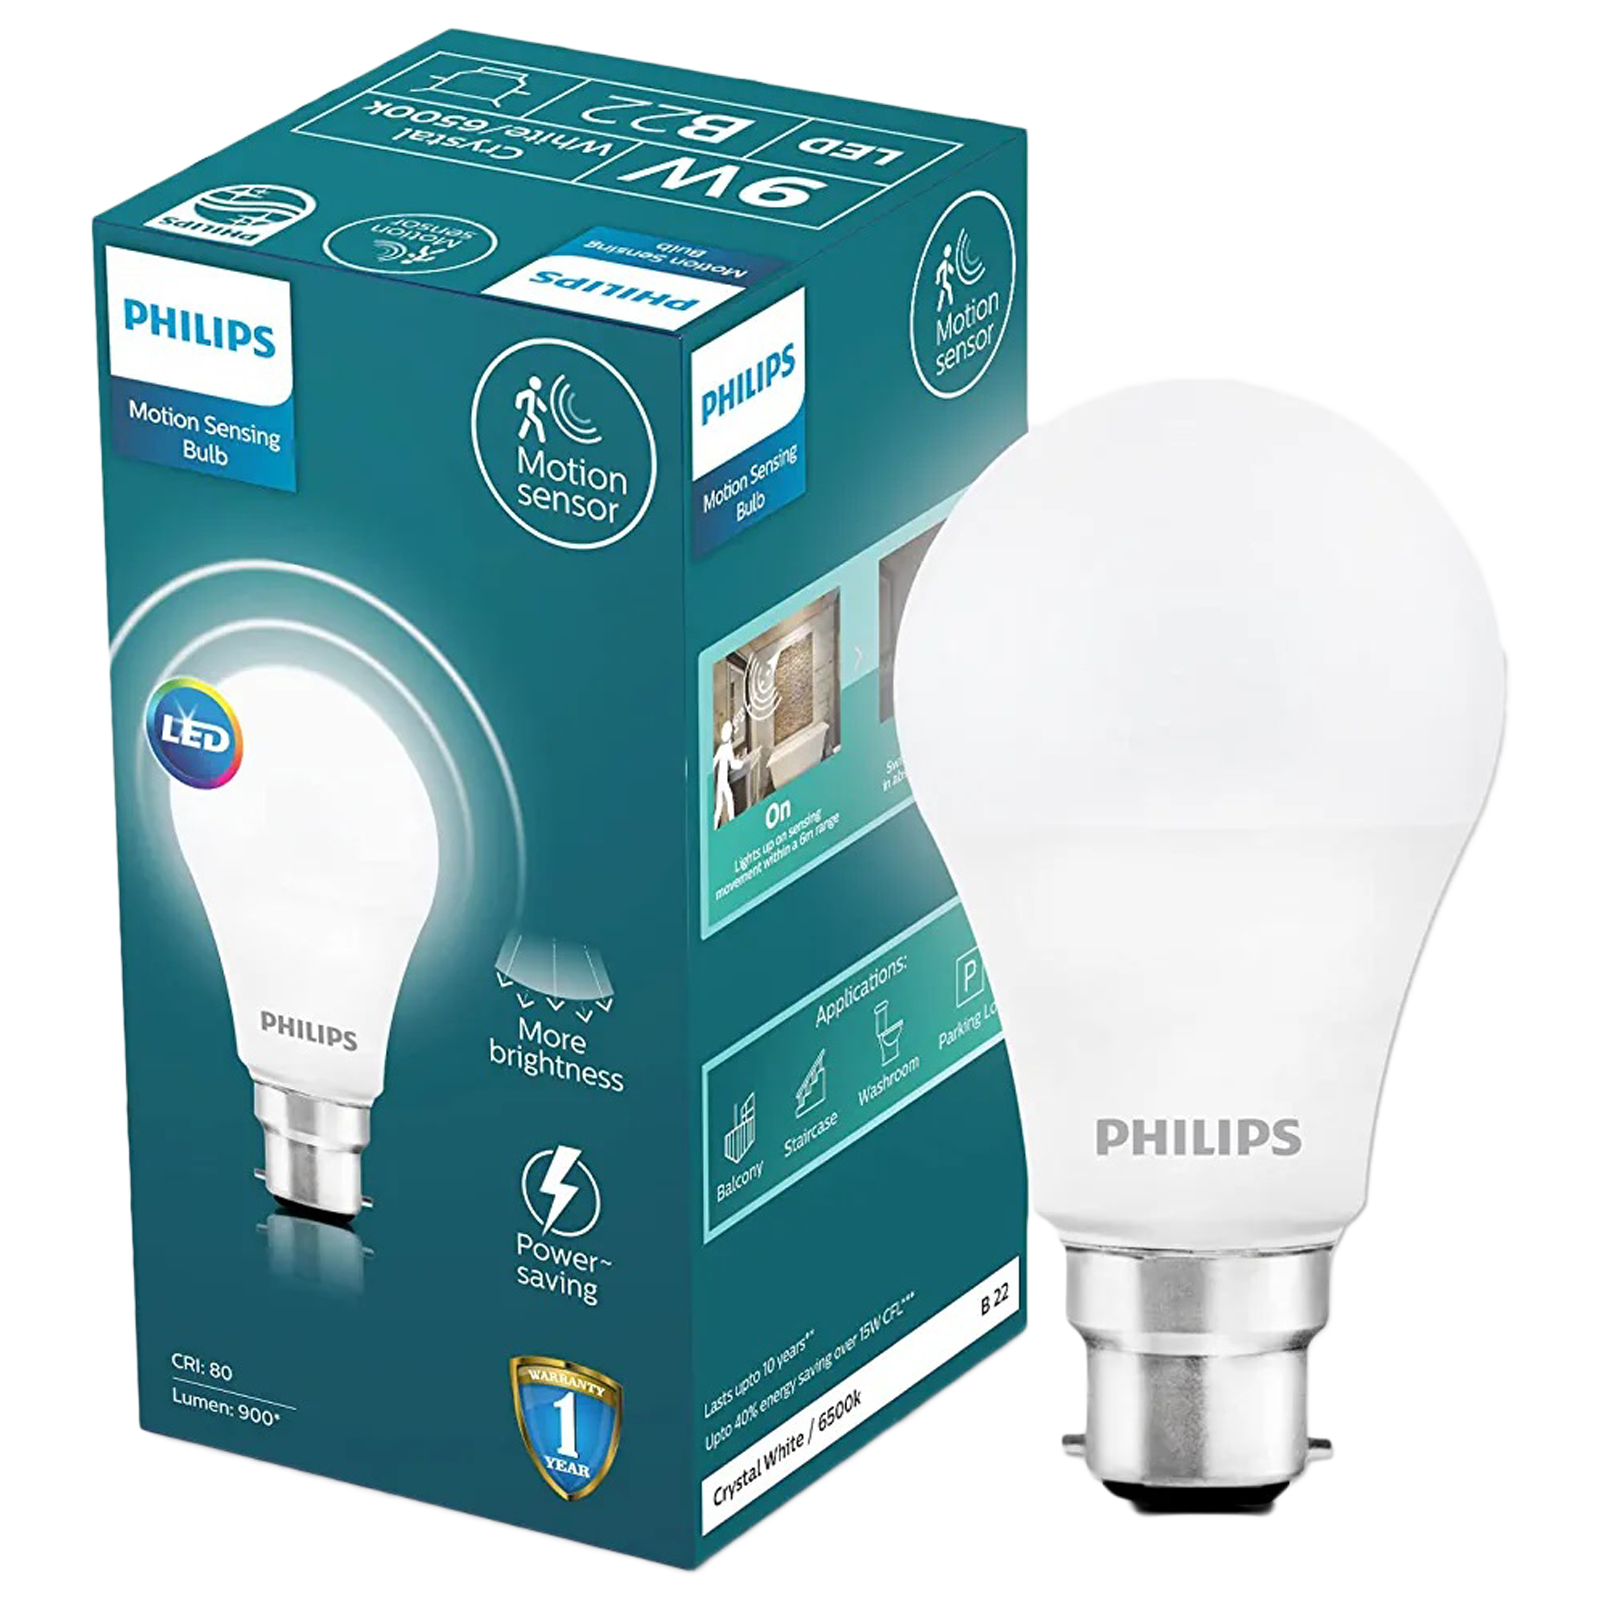 Buy Philips B22 9 Watts Electric Powered LED Bulb (900 Lumens,  929003546413, Crystal White) Online - Croma